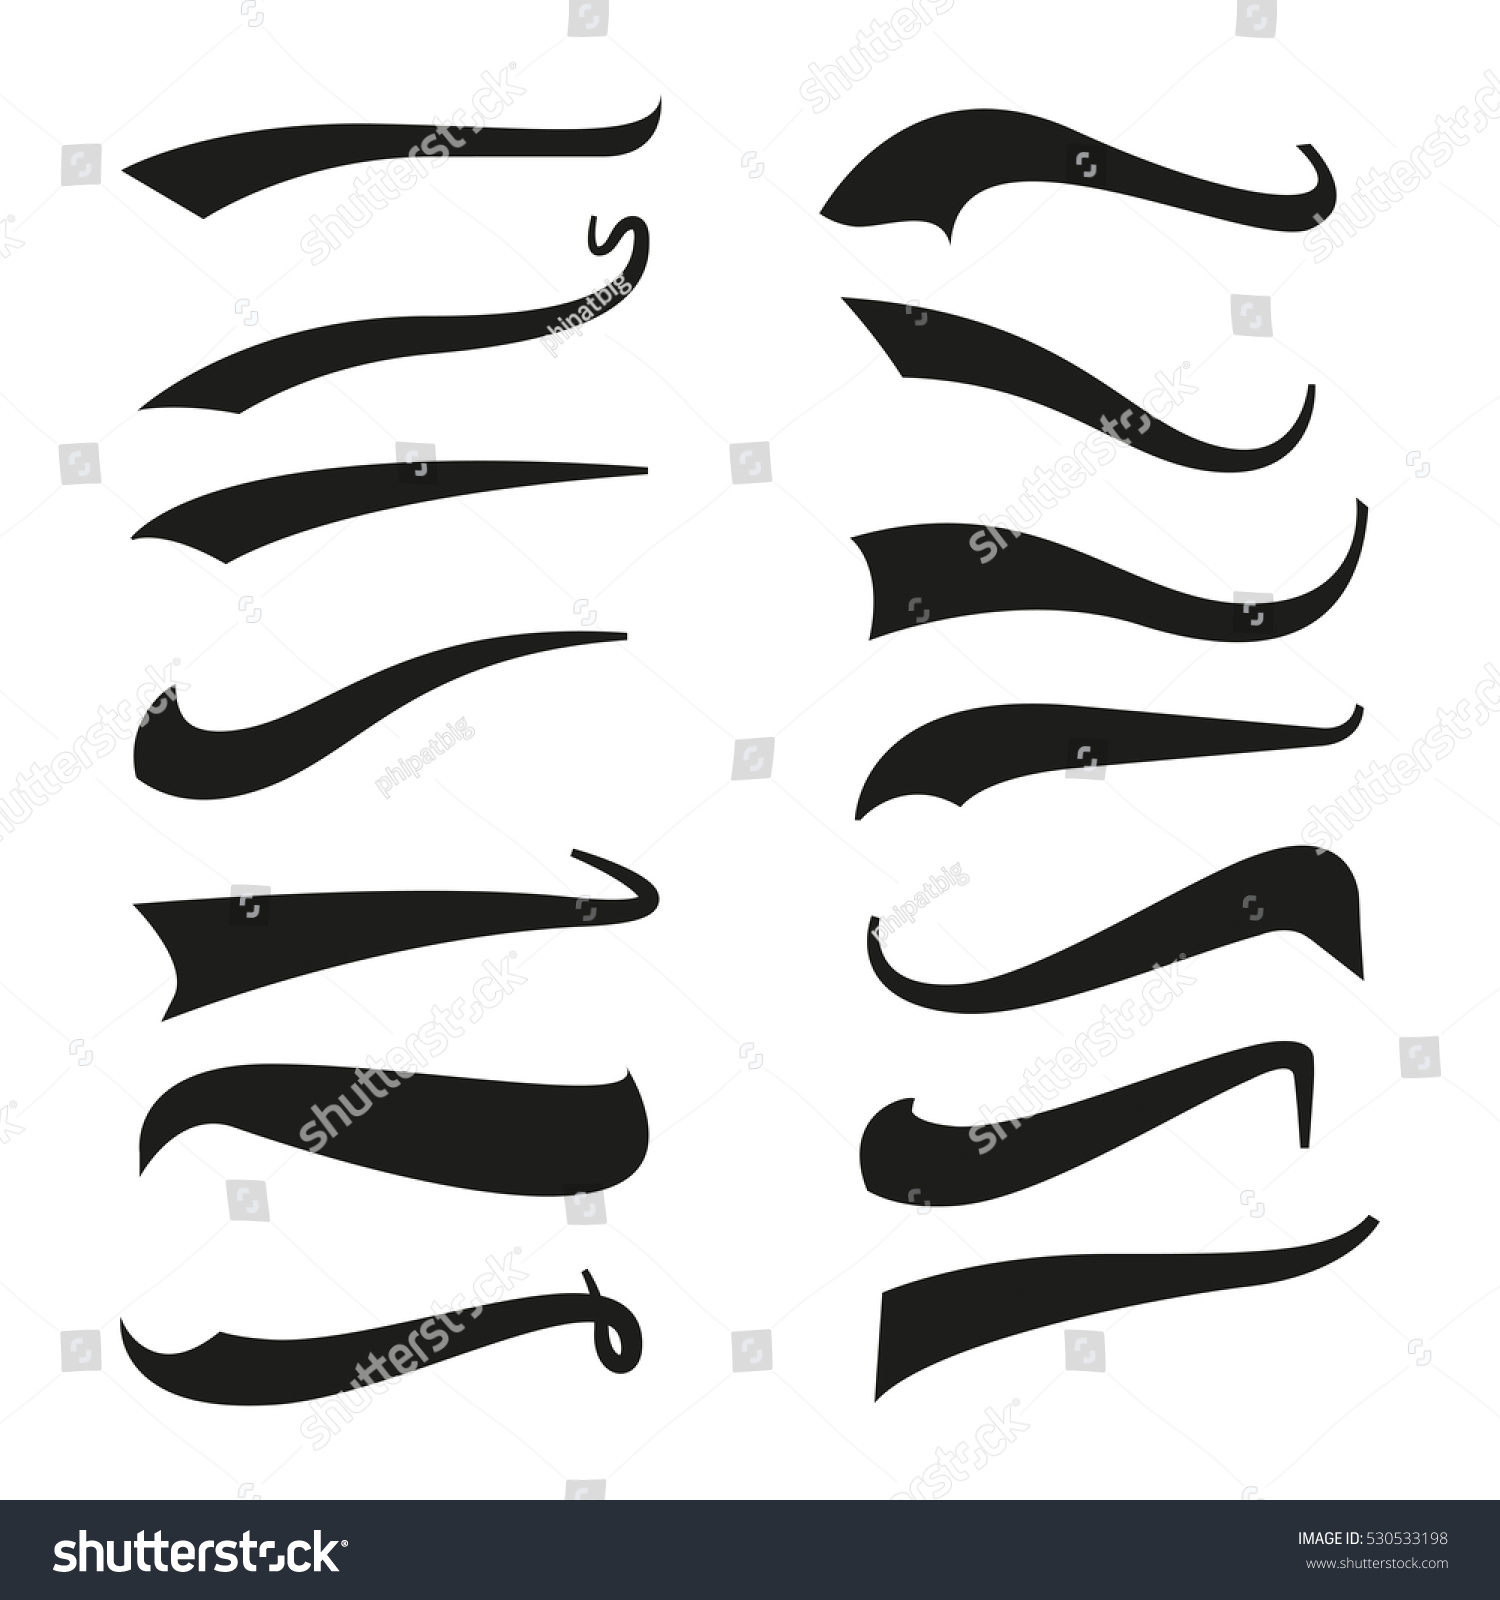 Vintage Text Tail Set Stock Vector 530533198 - Shutterstock